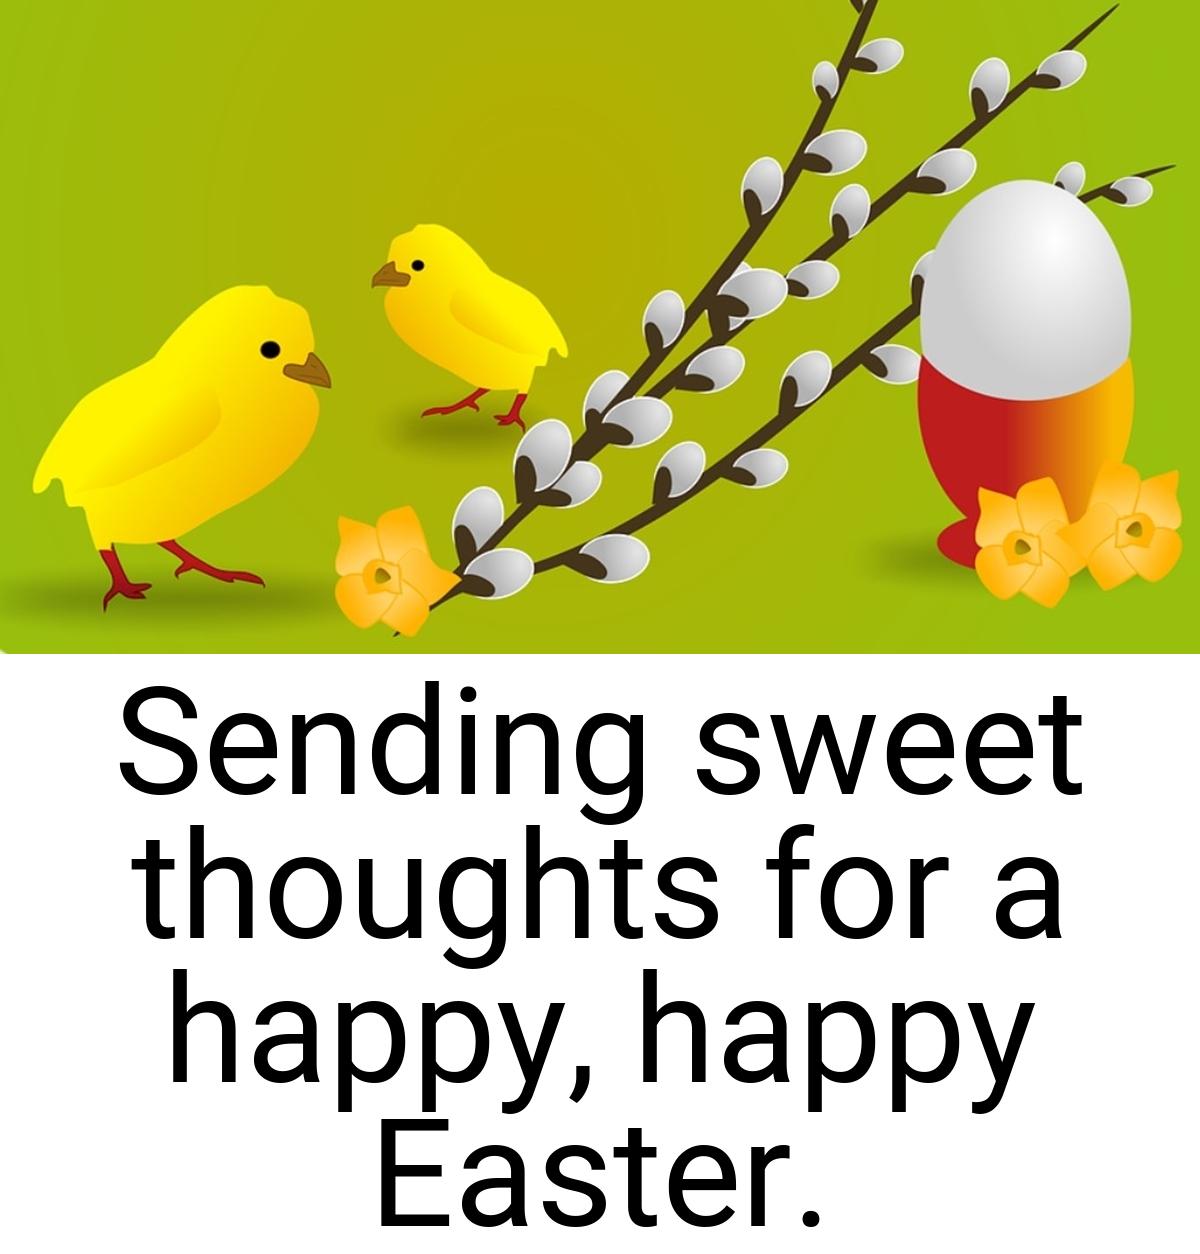 Sending sweet thoughts for a happy, happy Easter